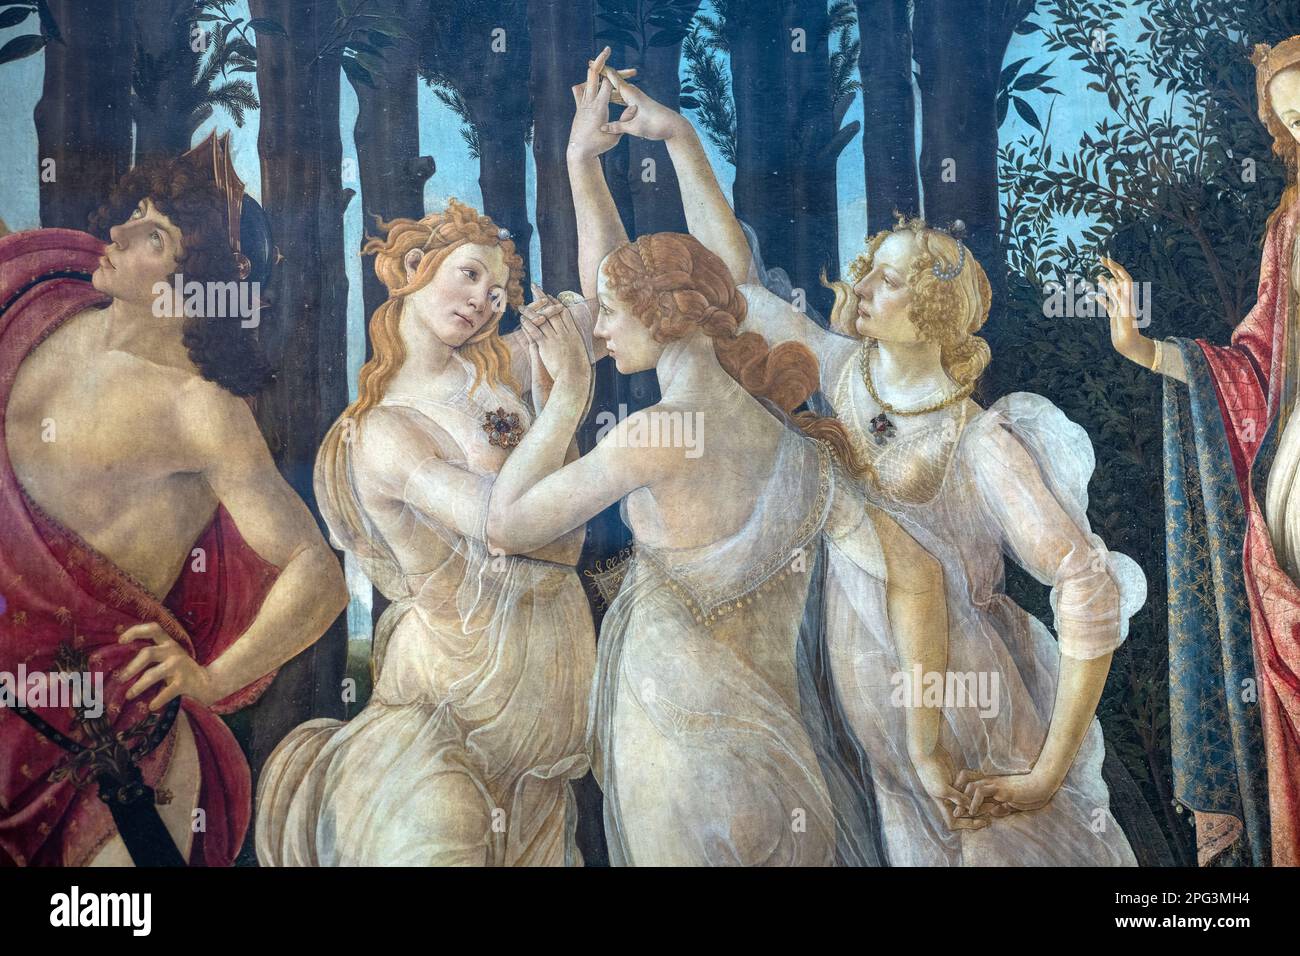 The Primavera, meaning Spring, painted by Sandro Botticelli on display at the Uffizi gallery in Florence, Italy. Stock Photo